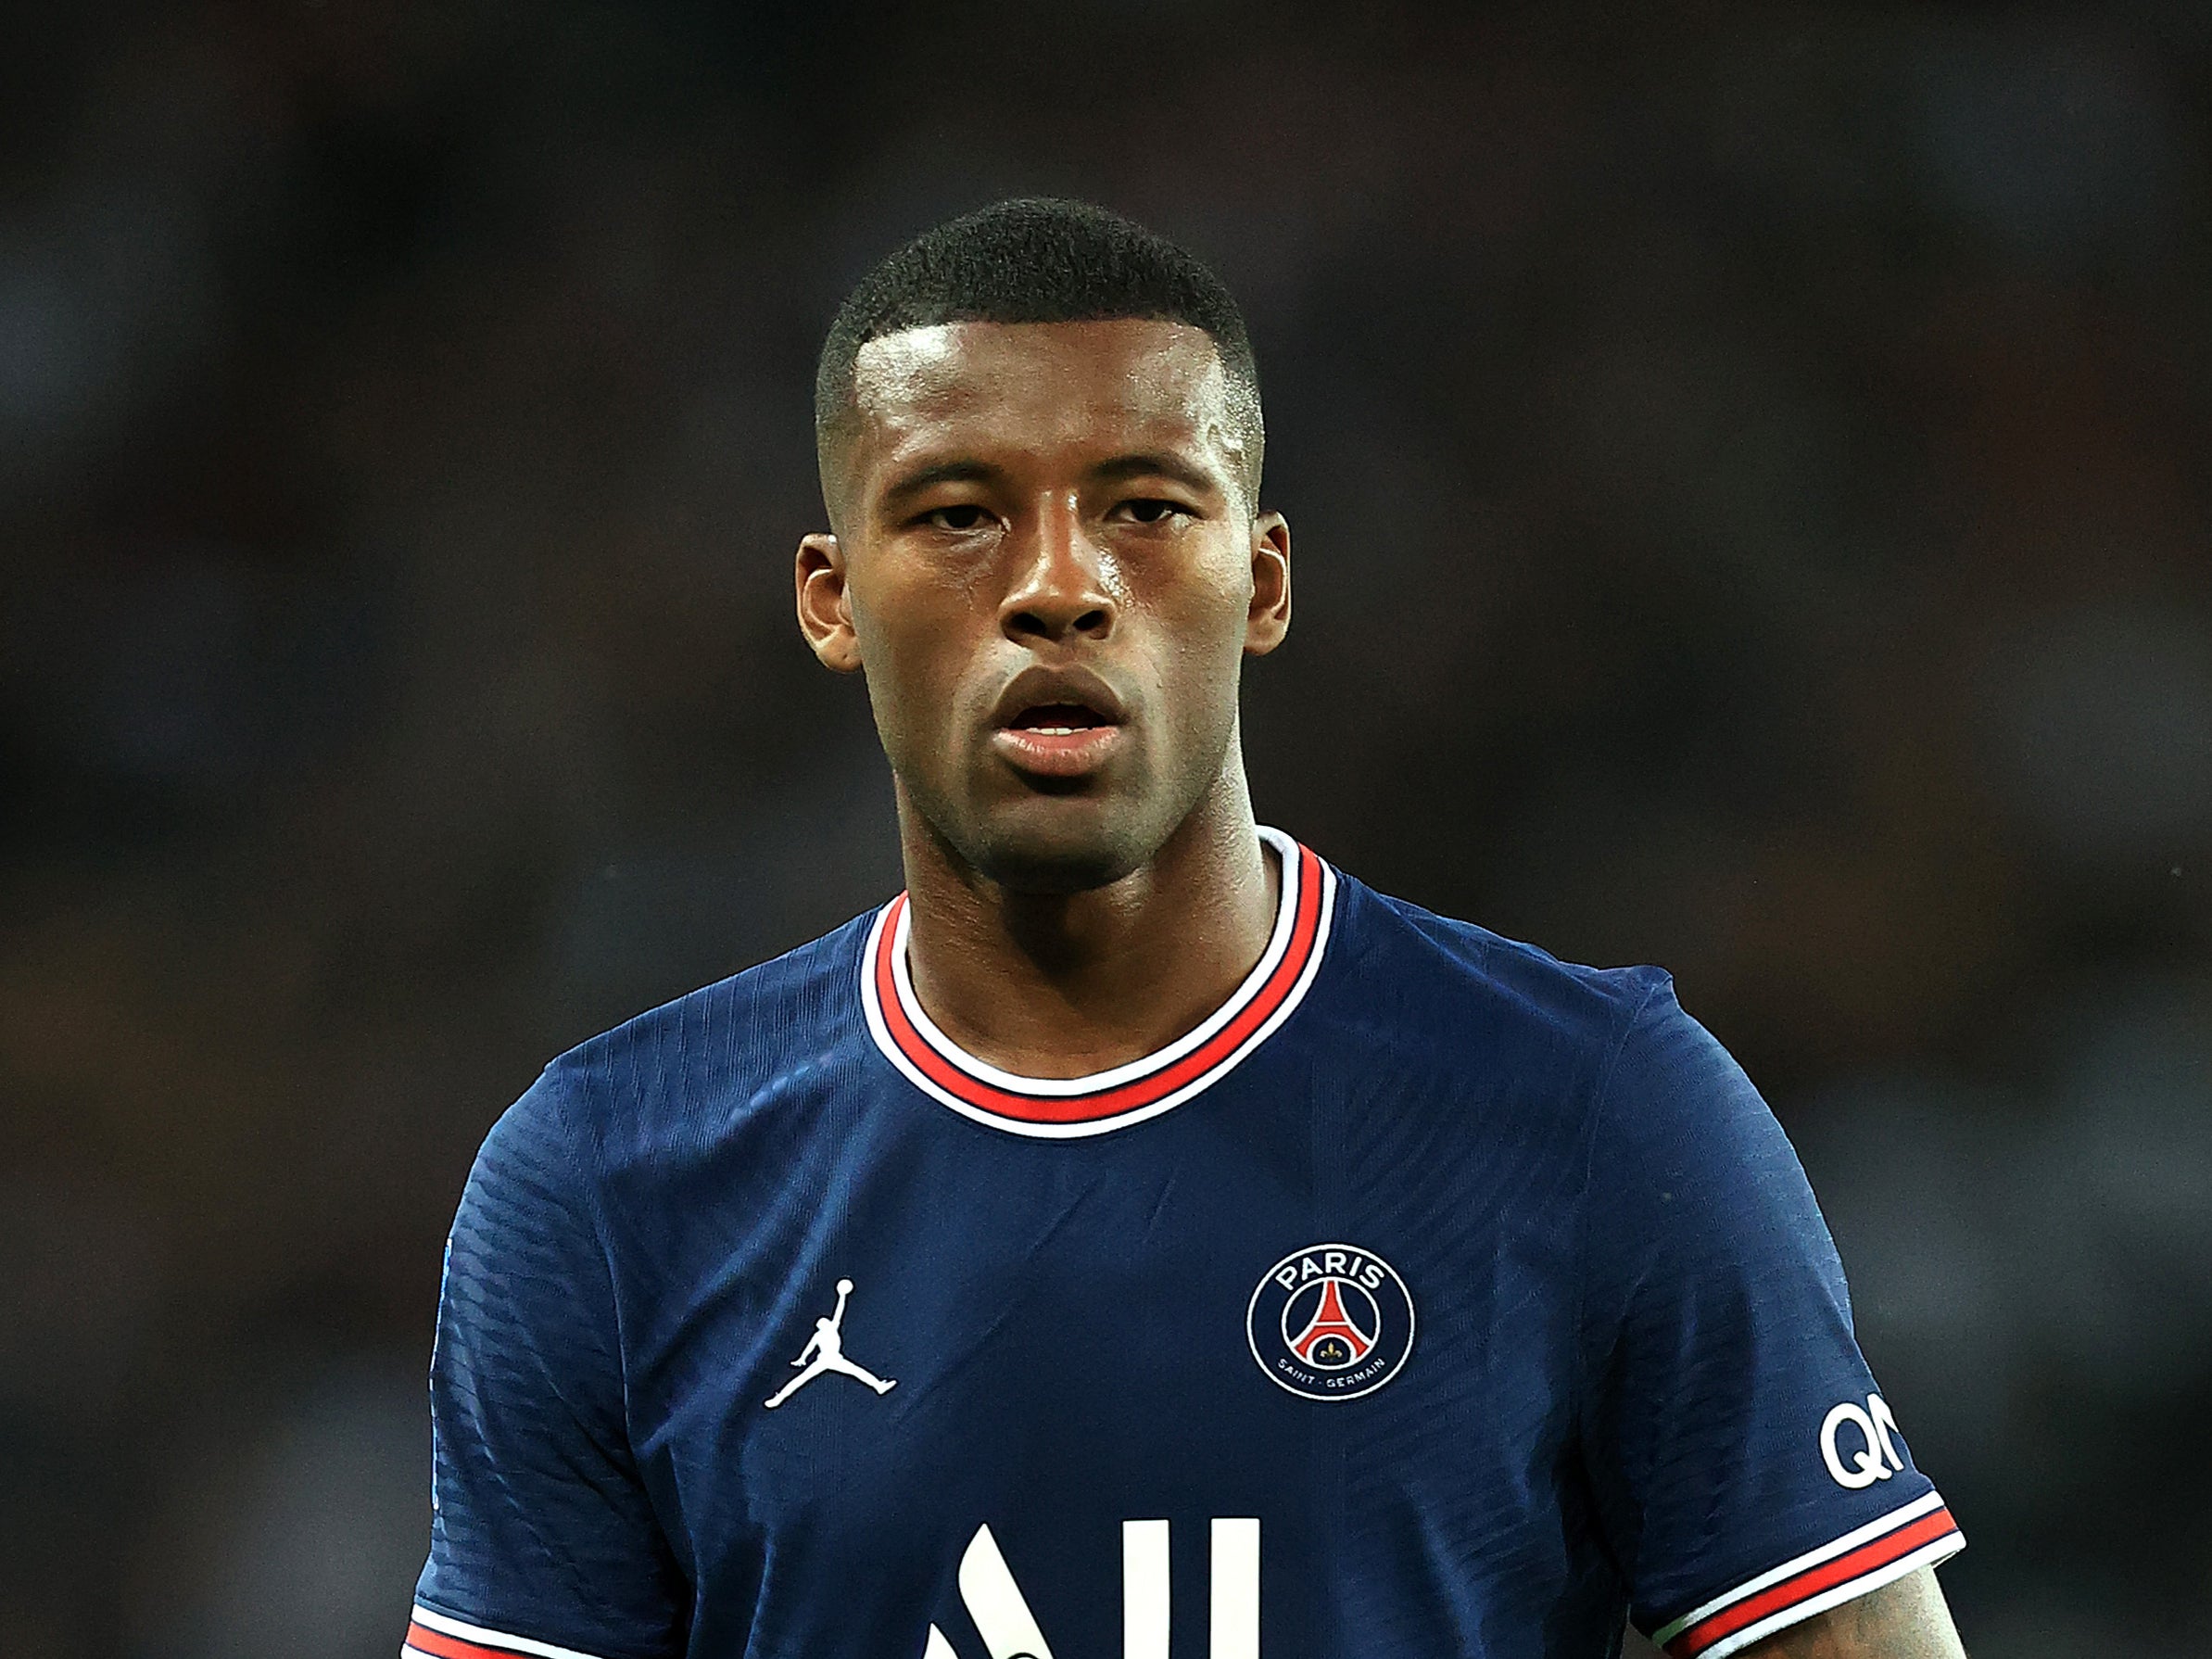 Wijnaldum is yet to fully settle at PSG since joining on a free transfer